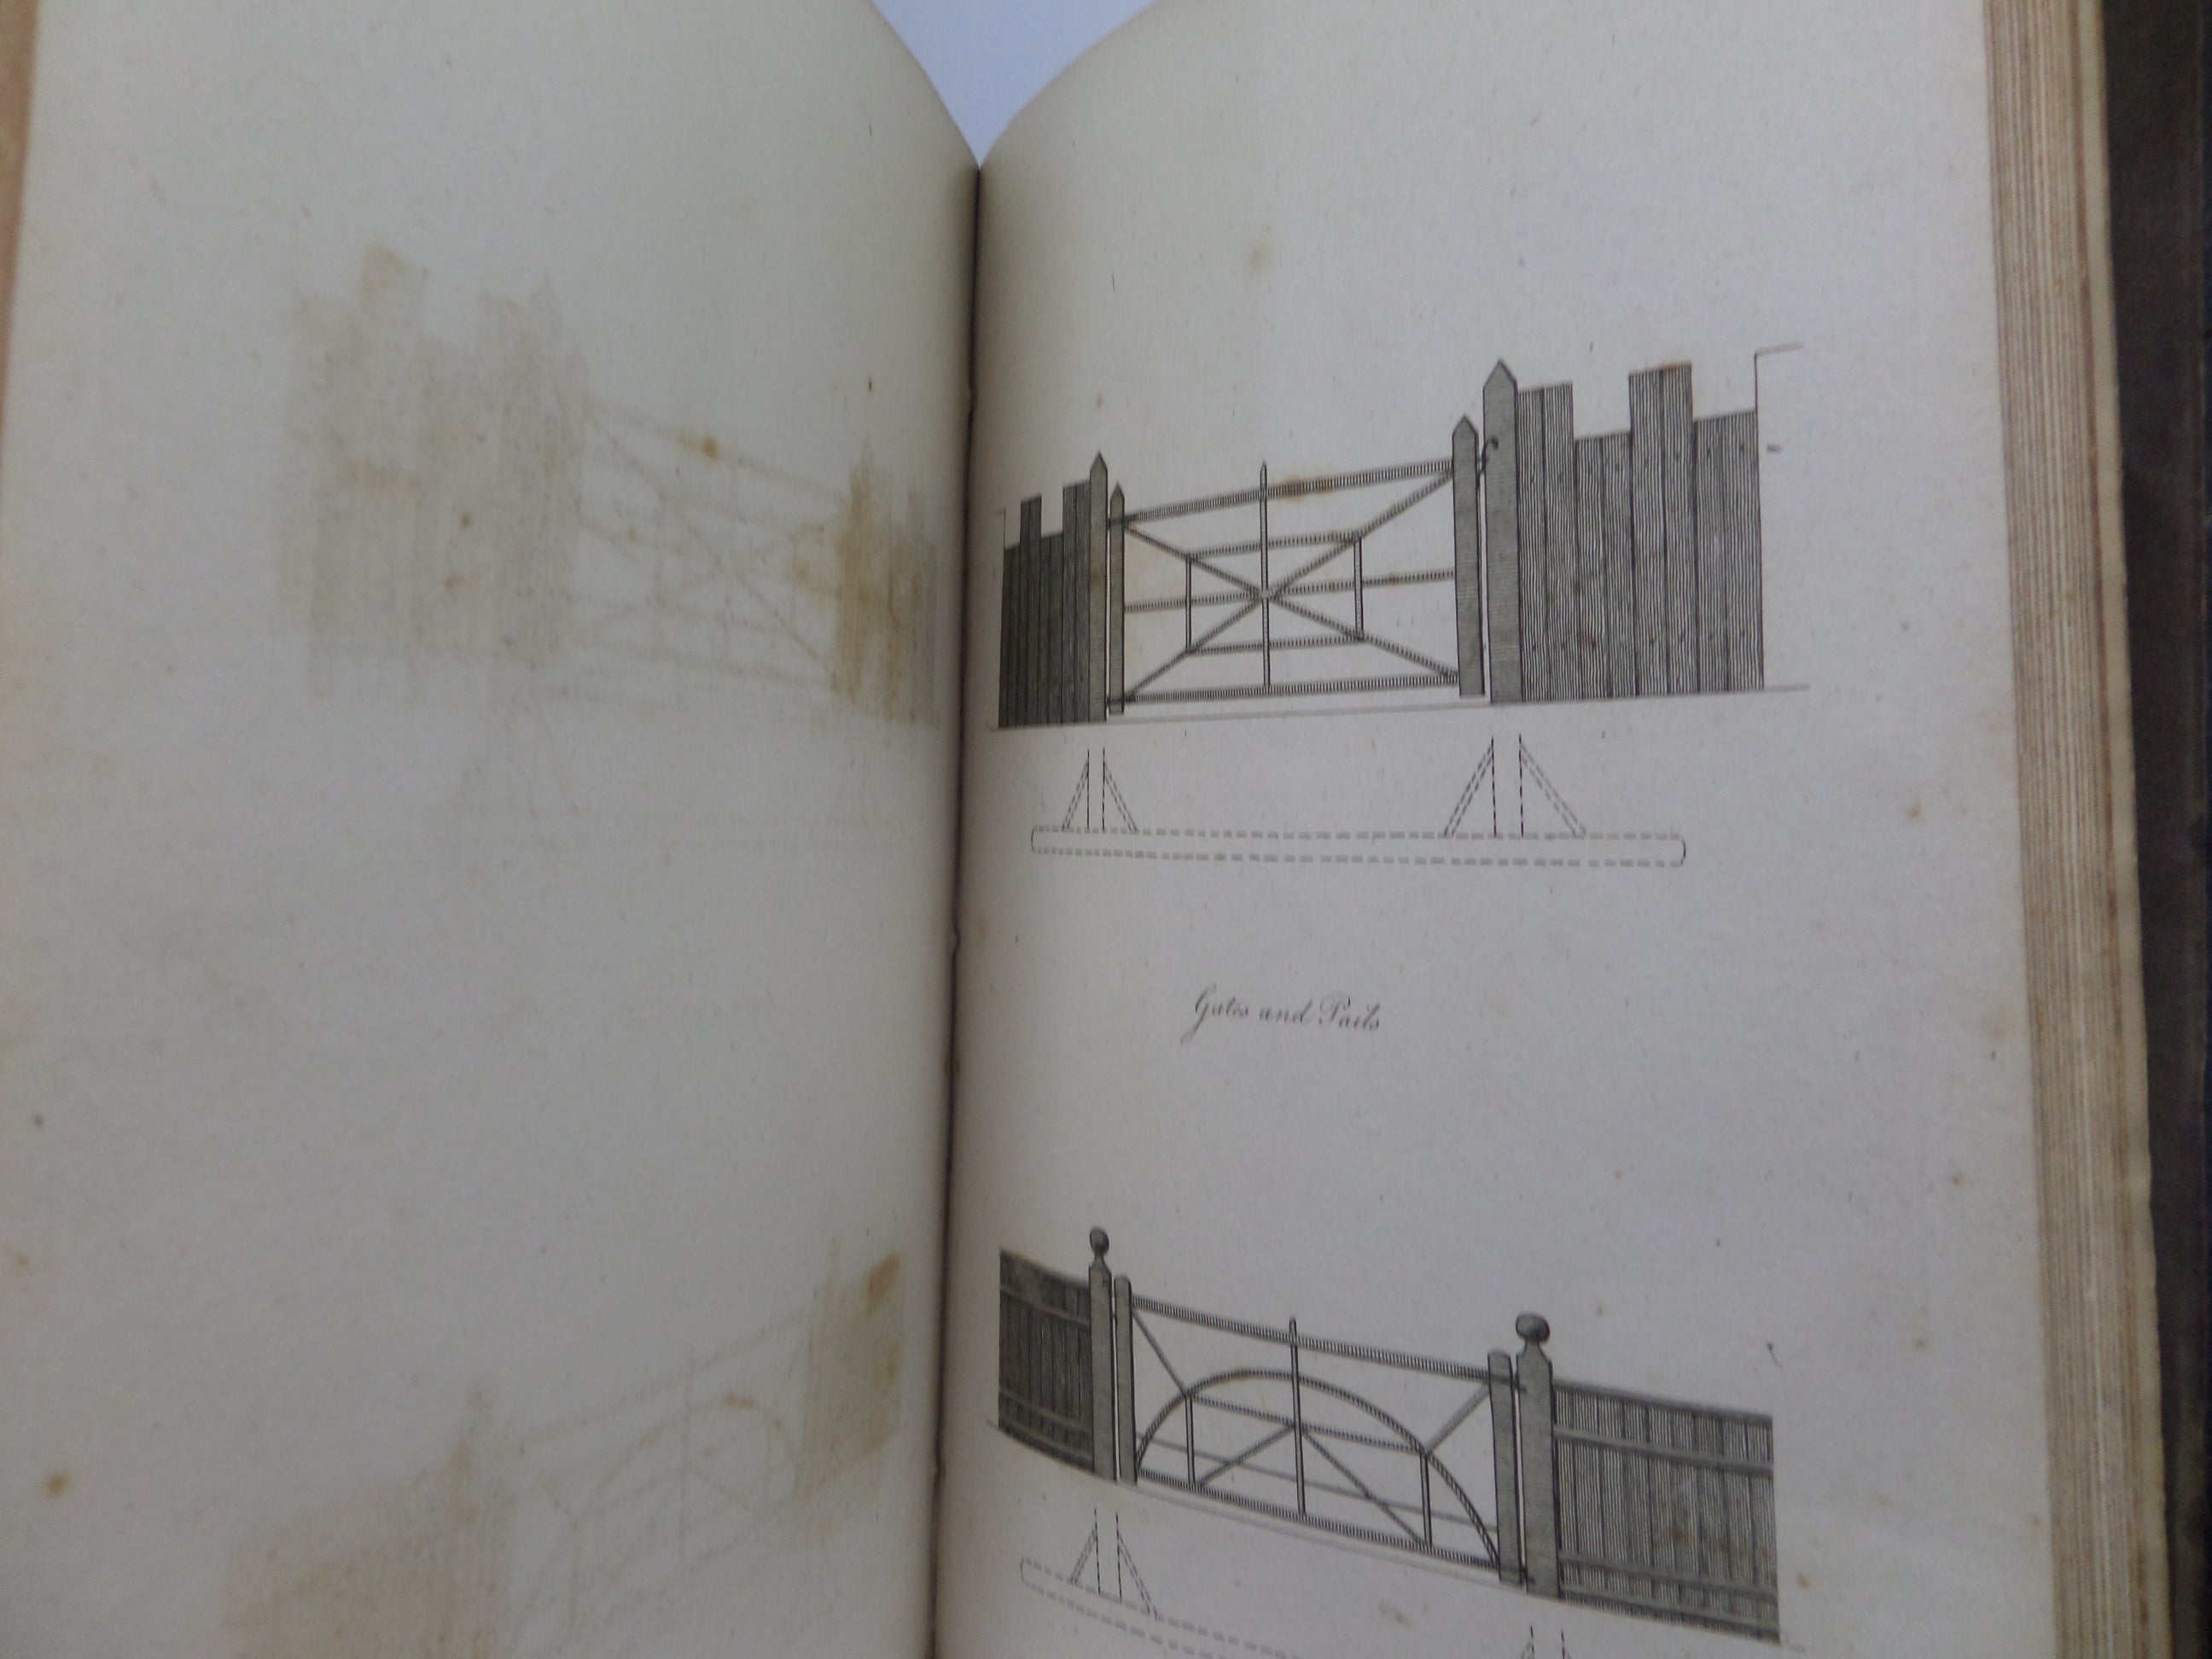 METAL WORK - PATTERN BOOKS: THE SMITH'S RIGHT HAND 1765 & DESIGNS FOR GATES 1800